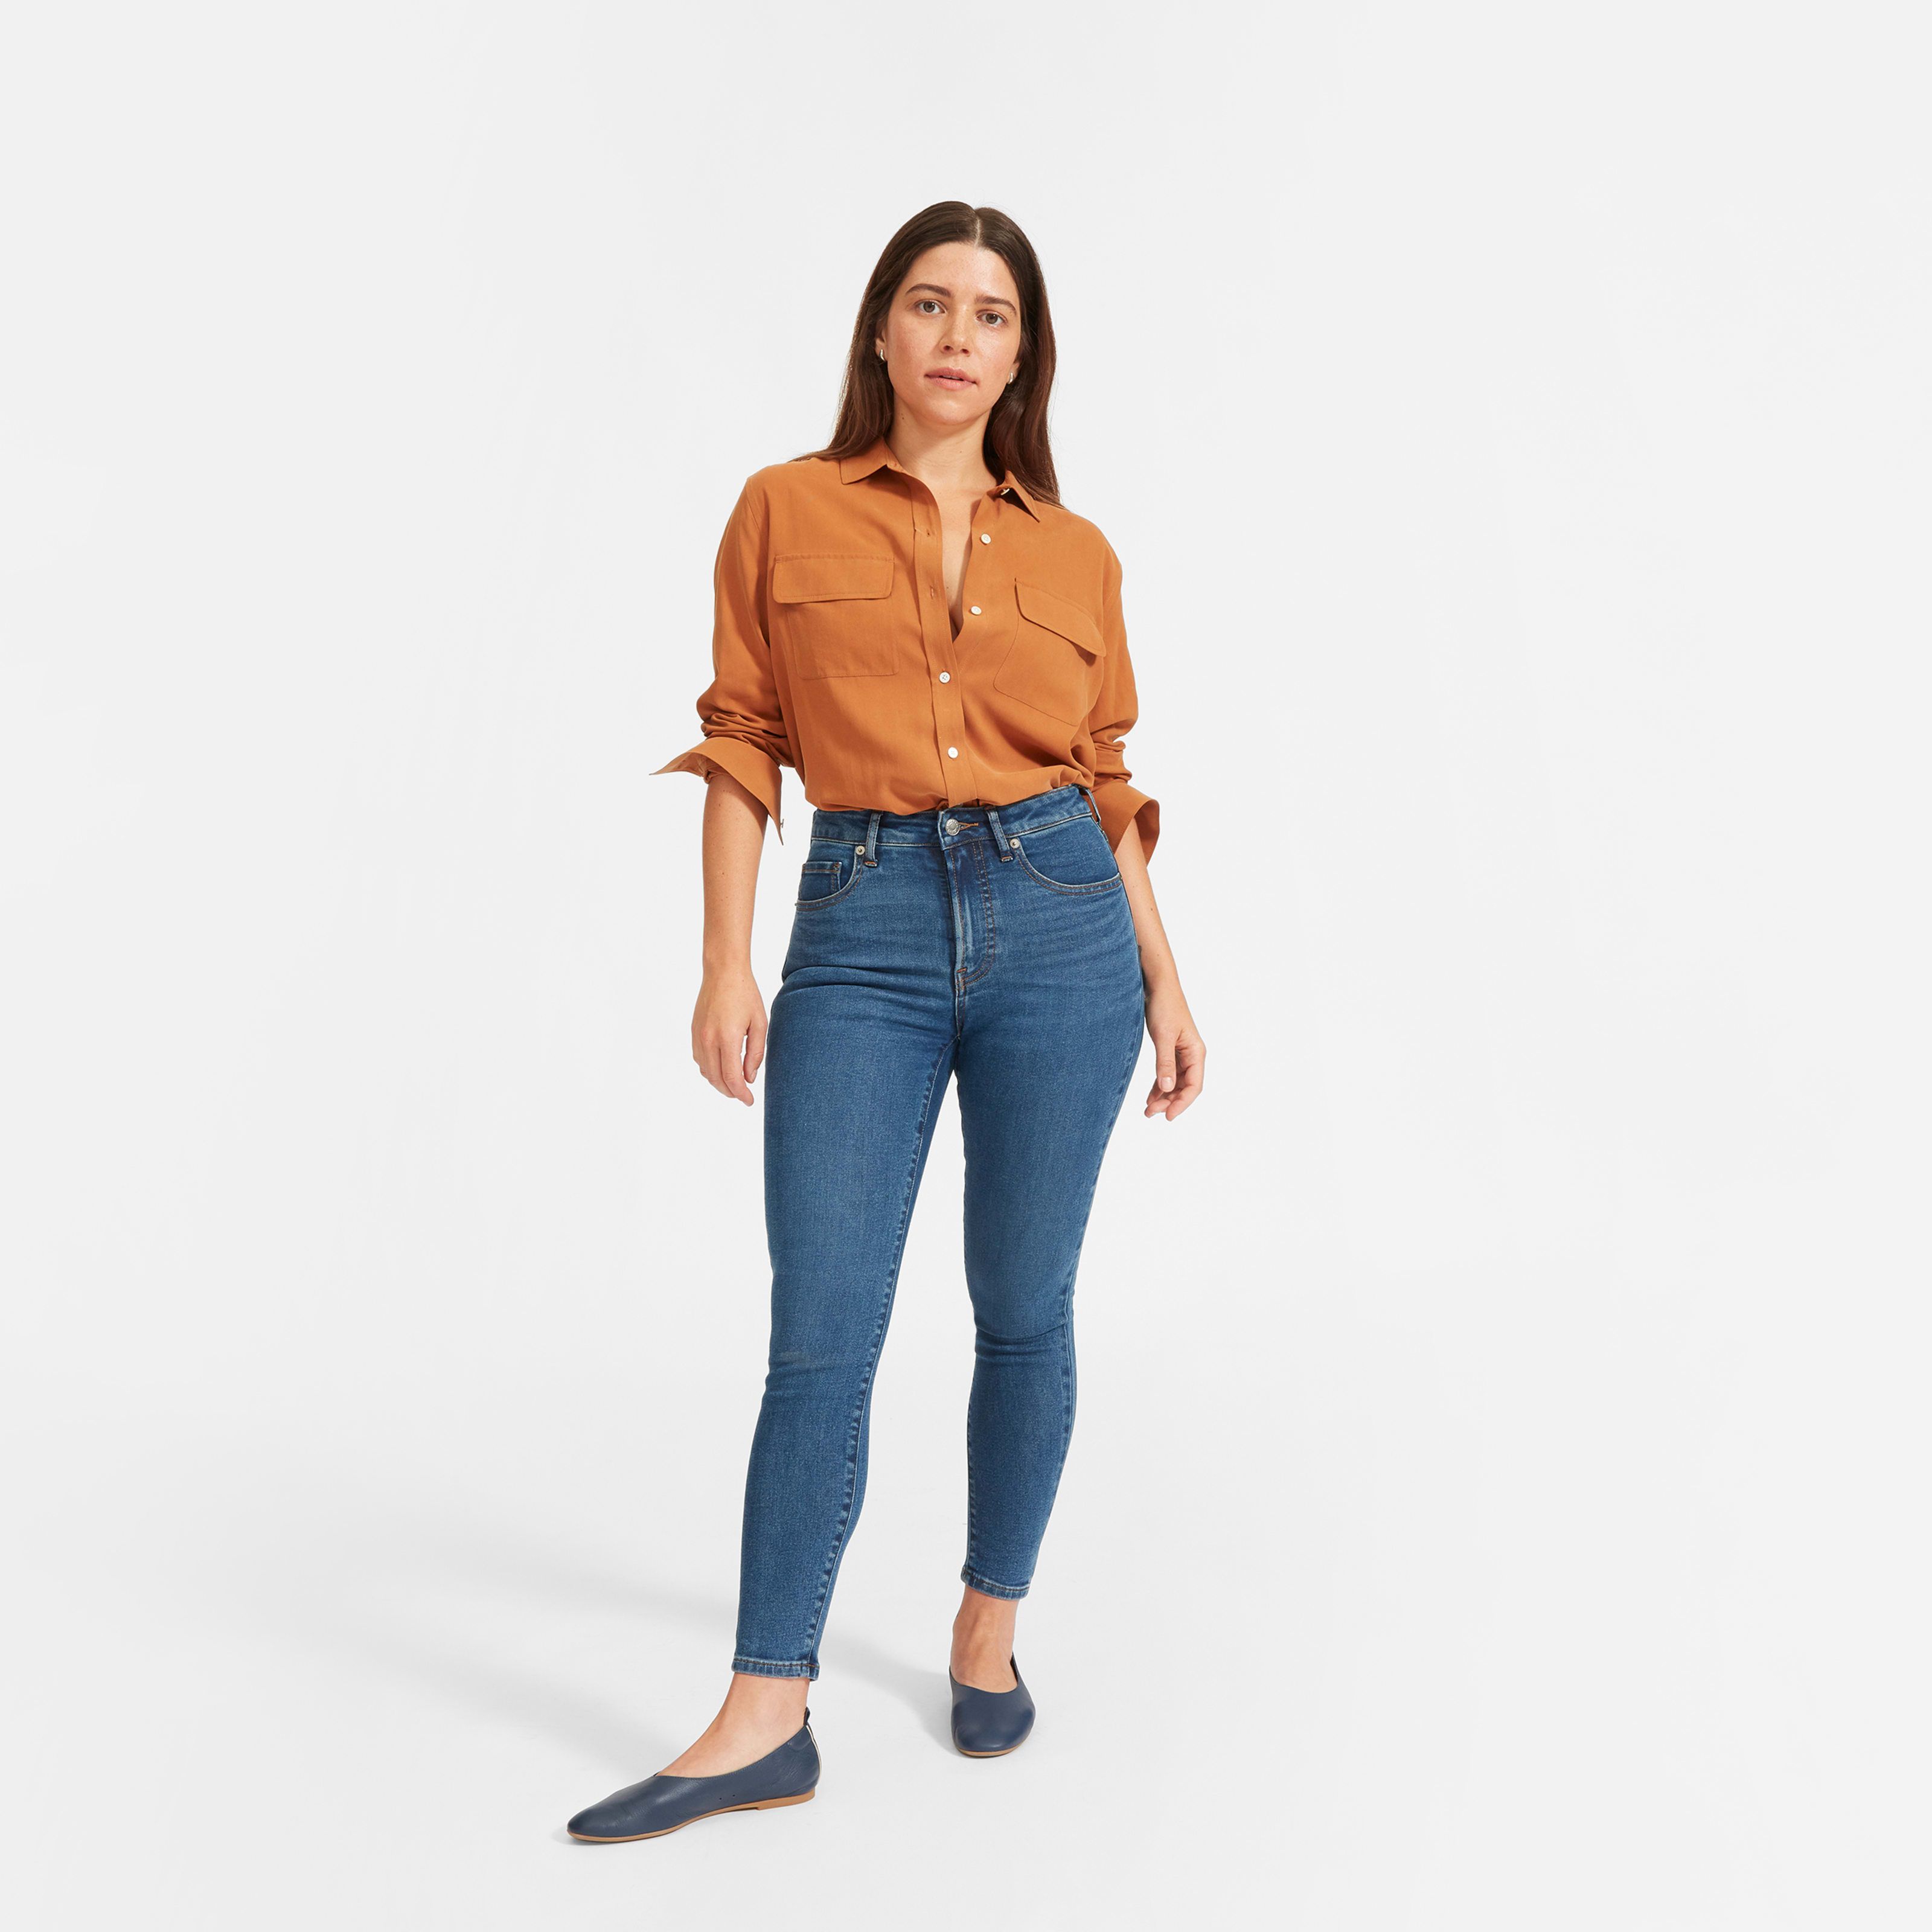 Women's Curvy Authentic Stretch High-Rise Skinny Jean by Everlane in Mid Blue, Size 29 | Everlane